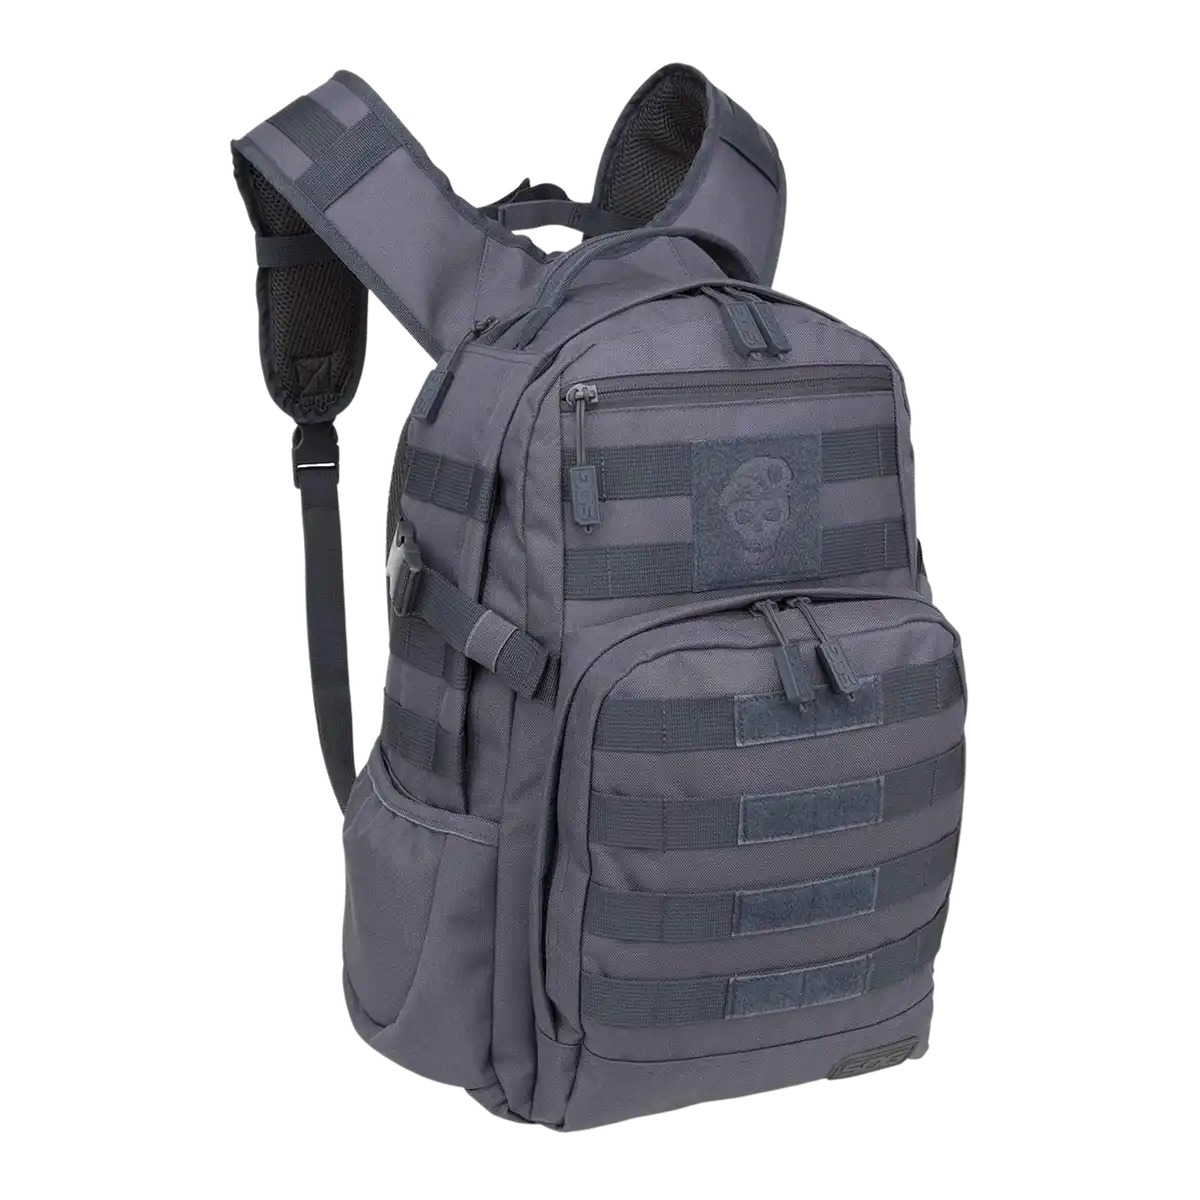 A prominent photograph of a tactical backpack—the model 'Ninja Daypack' by the company SOG in the dark grey color